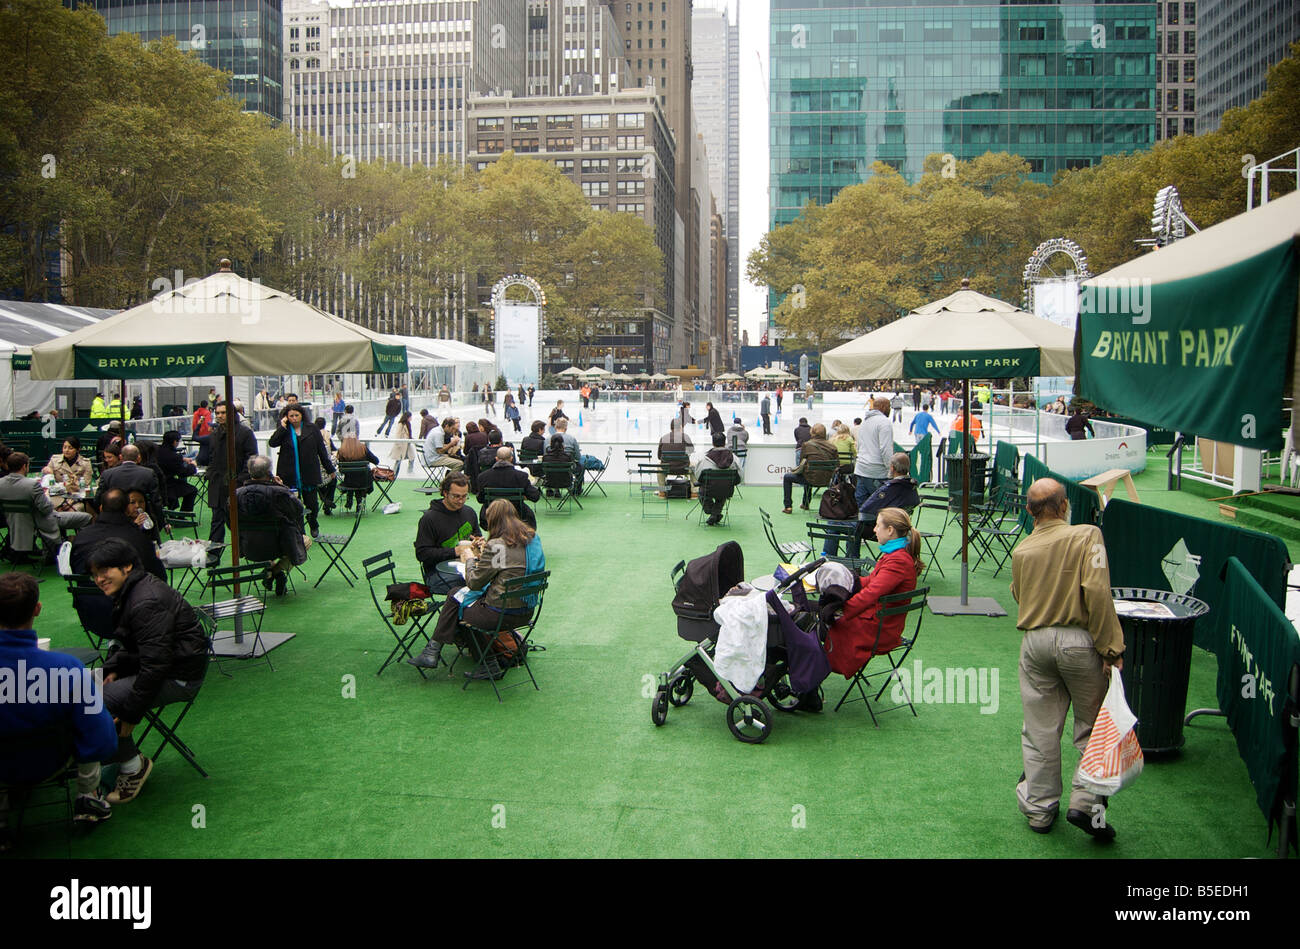 Bryant Park Skating Rink in New York City USA (For Editorial Use Only) Stock Photo